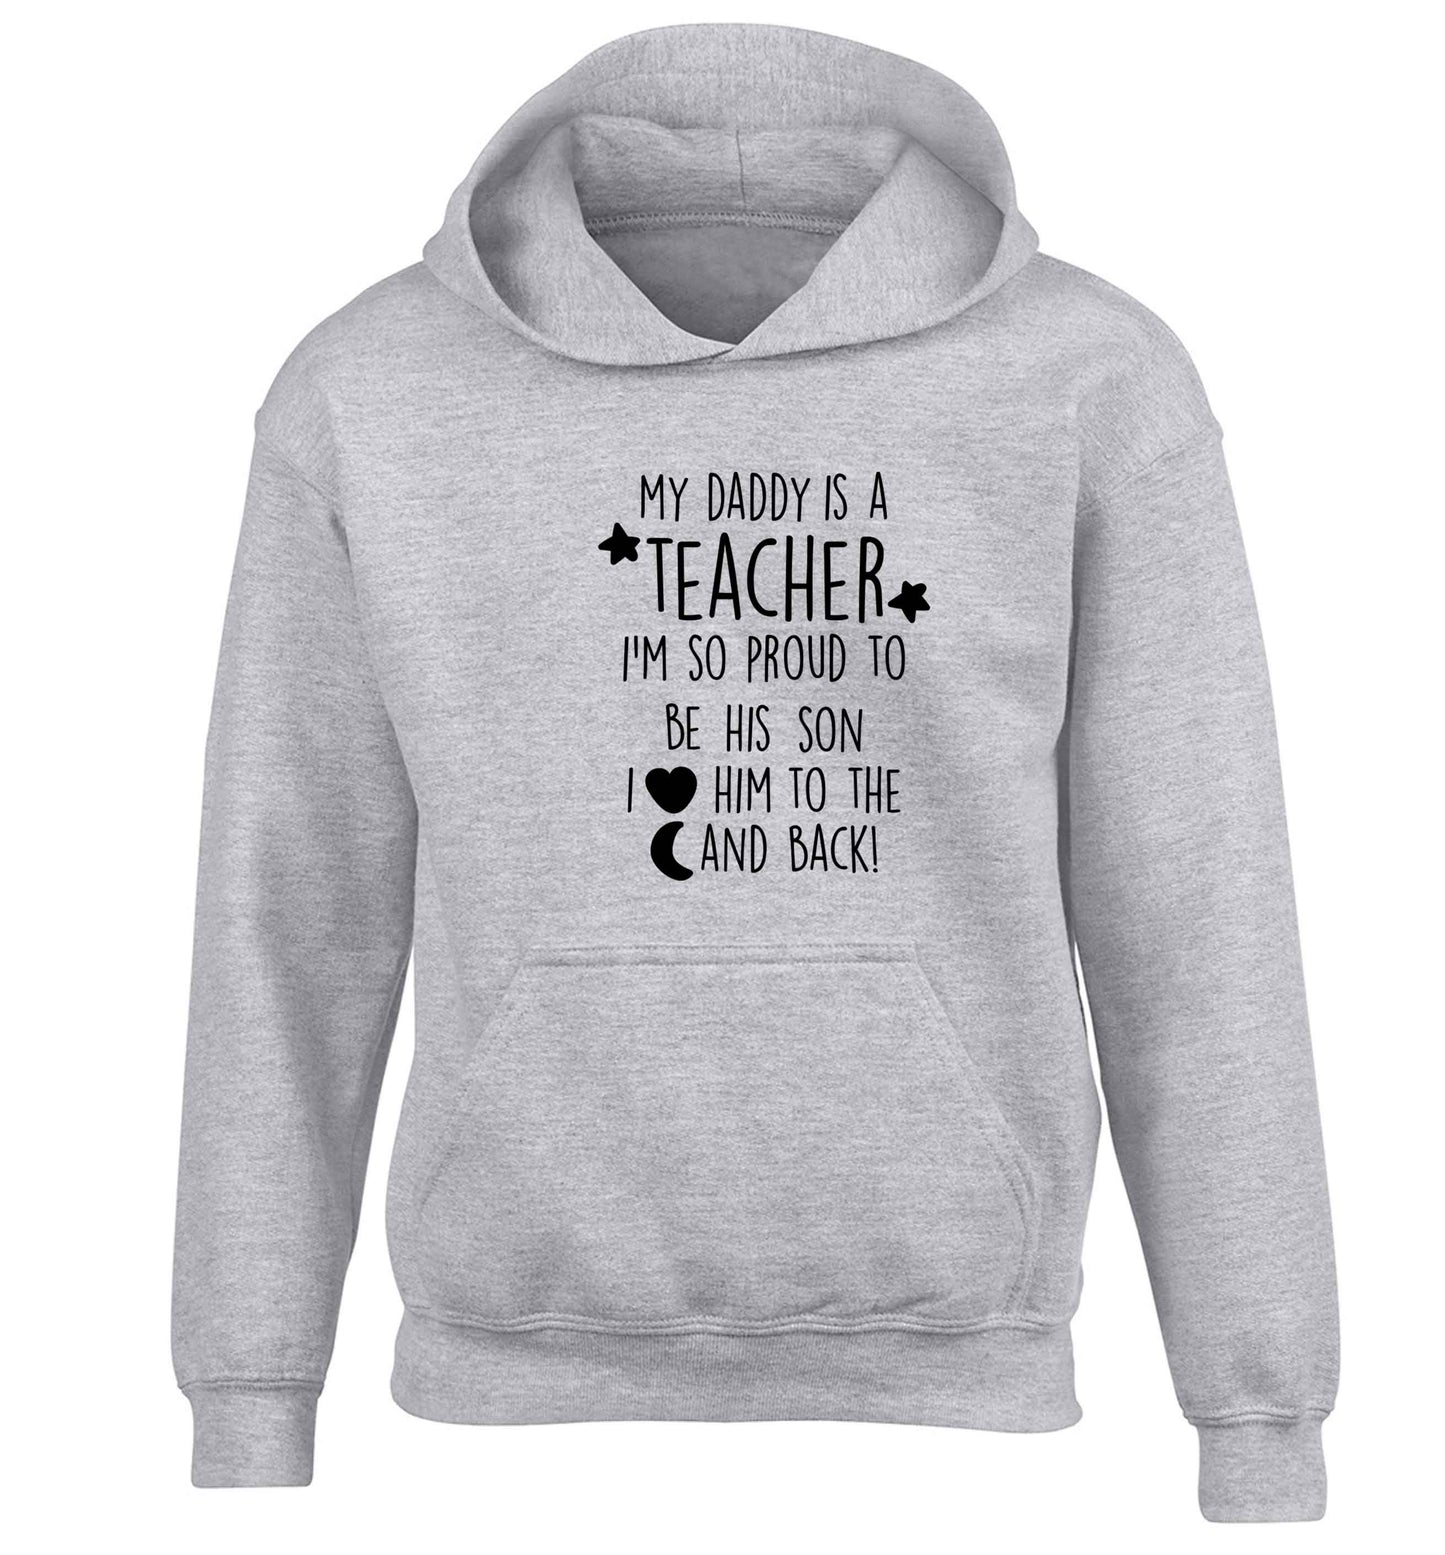 My daddy is a teacher I'm so proud to be his son I love her to the moon and back children's grey hoodie 12-13 Years